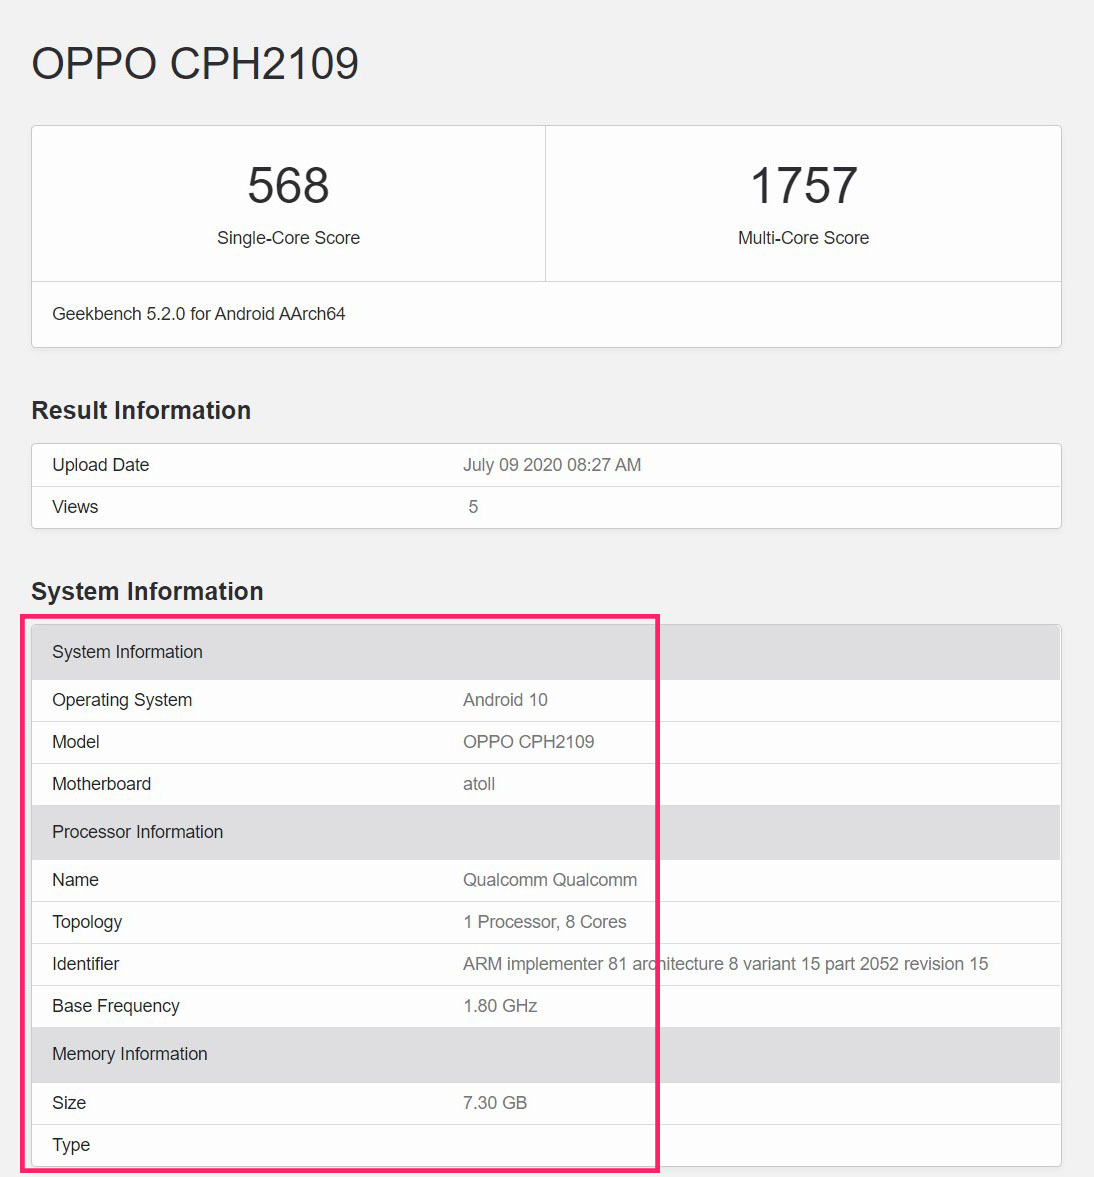 OPPO CPH2109, allegedly the Global variant of OPPO CPH2109 visits Geekbench